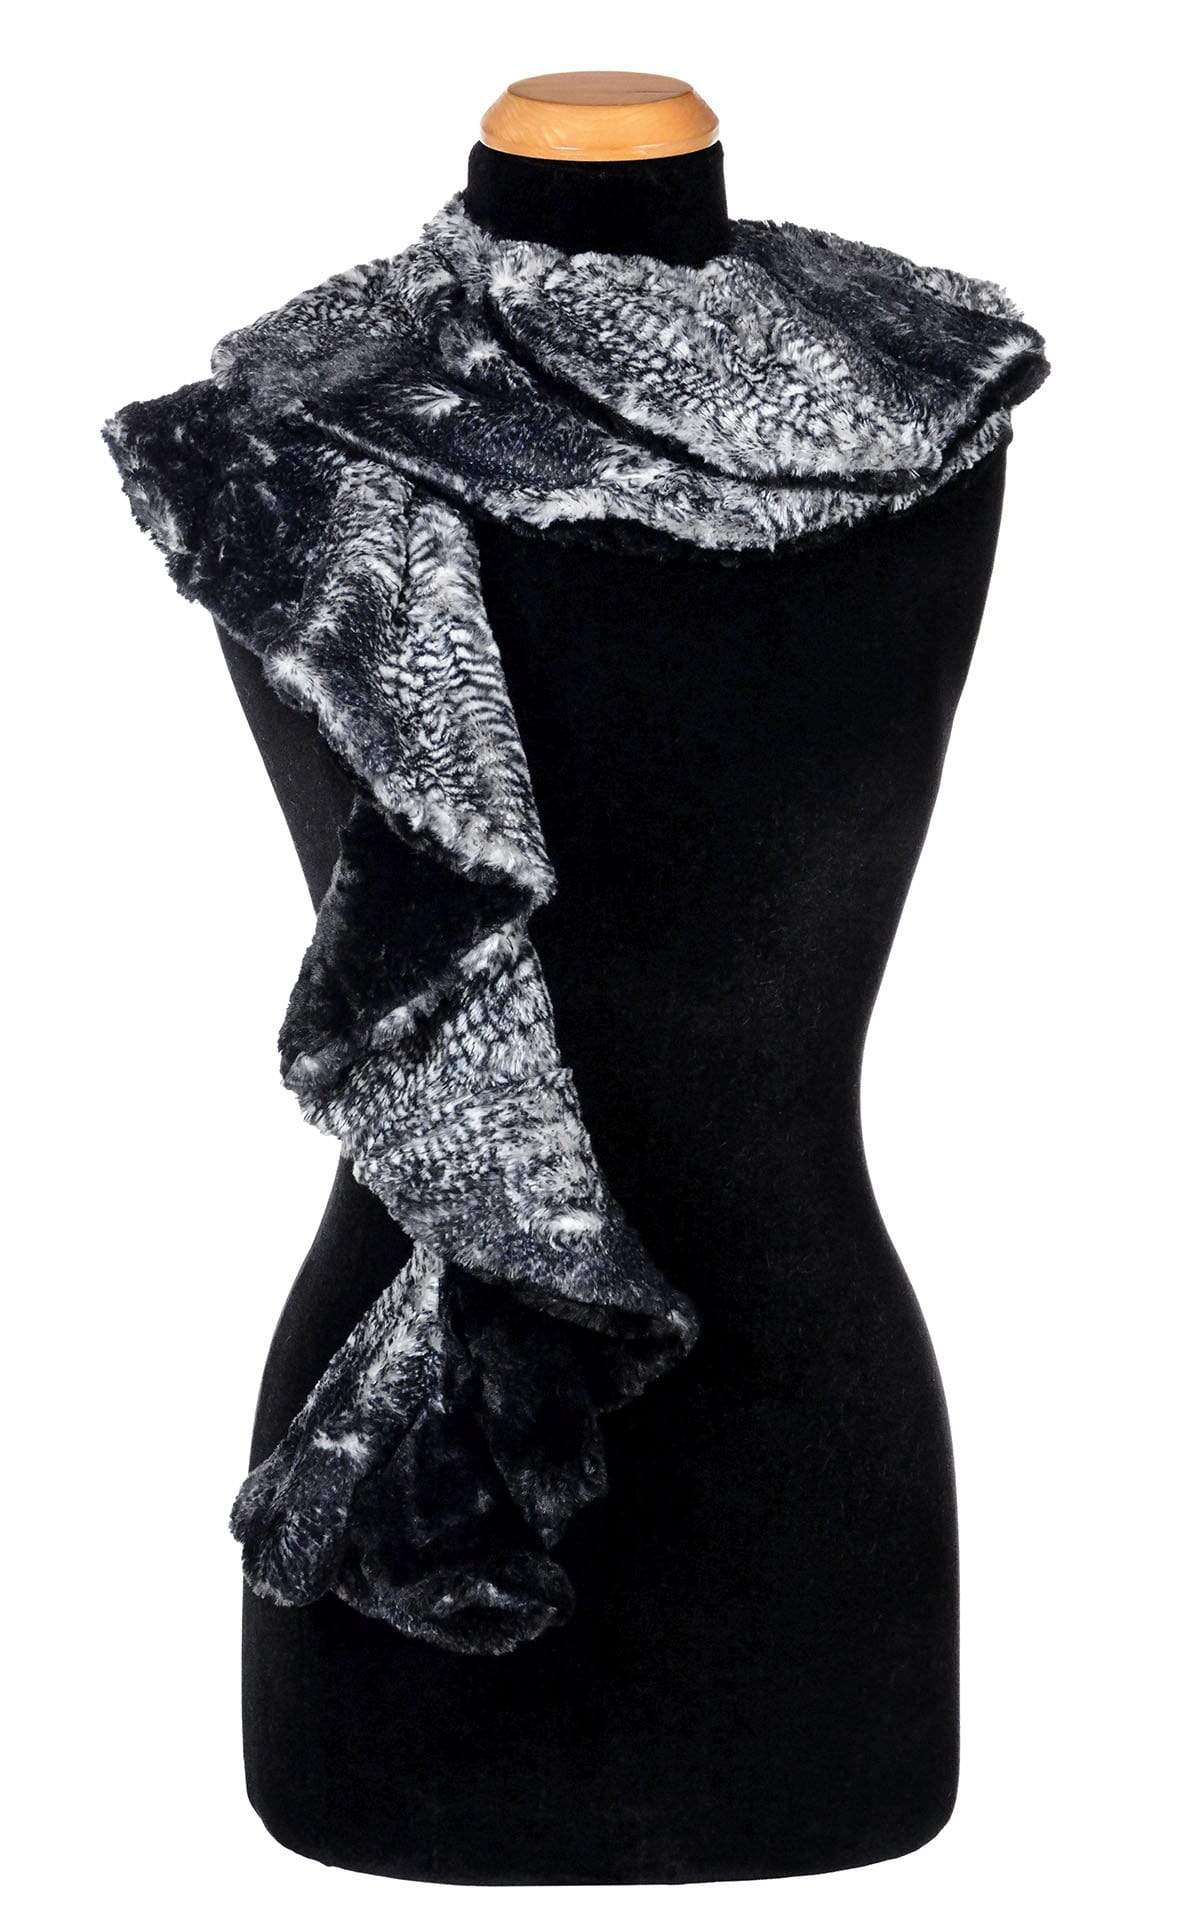 Cascade Scarf - Two-Tone Assorted Faux Fur